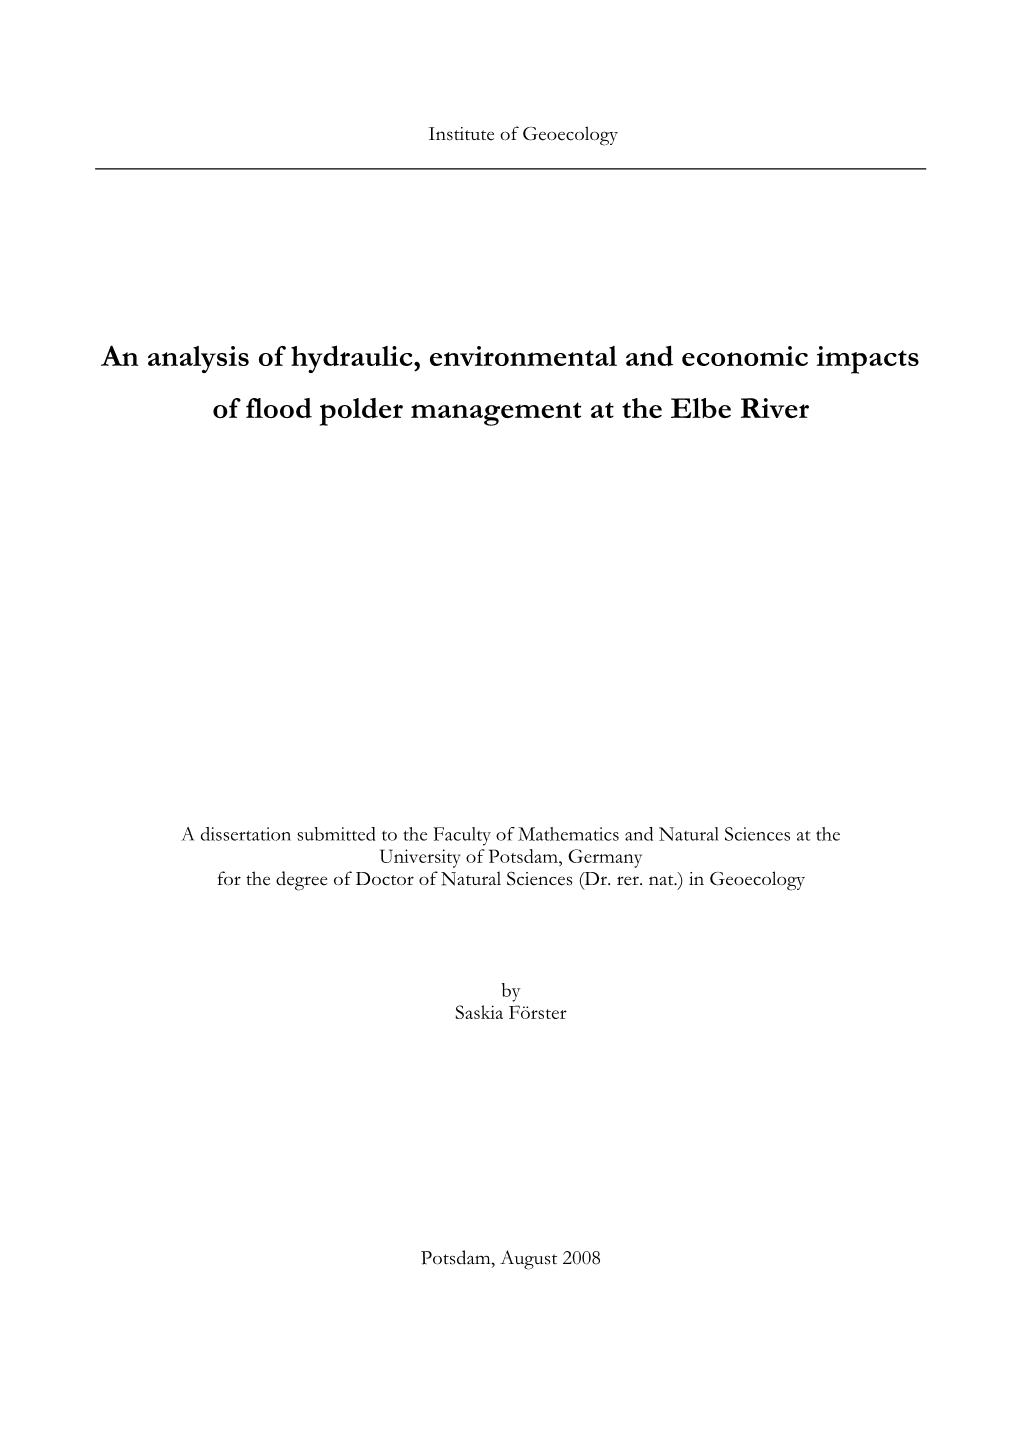 An Analysis of Hydraulic, Environmental and Economic Impacts of Flood Polder Management at the Elbe River